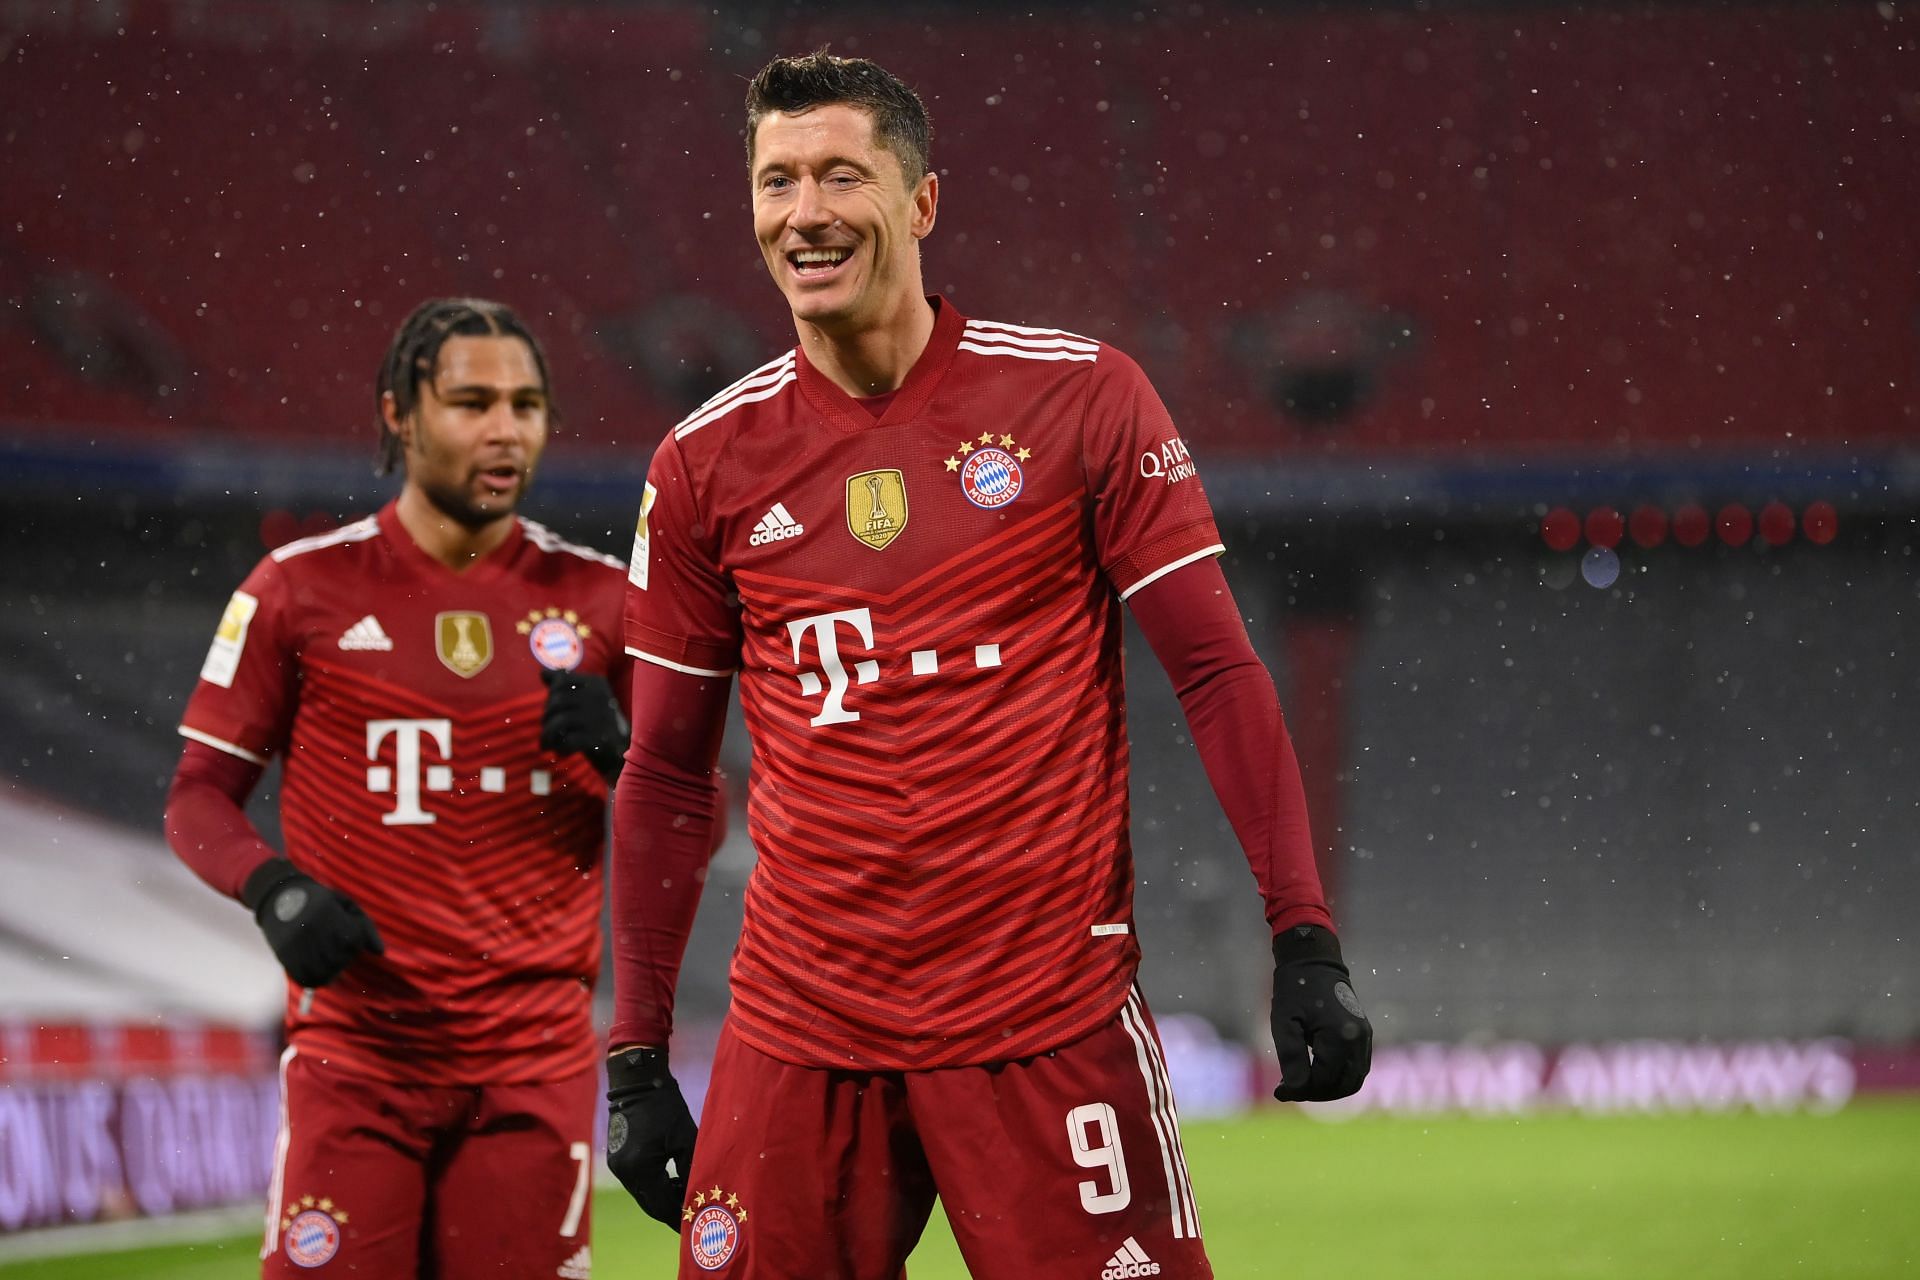 Lewandowski seems to have reached the goalscoring levels of Lionel Messi and Cristiano Ronaldo